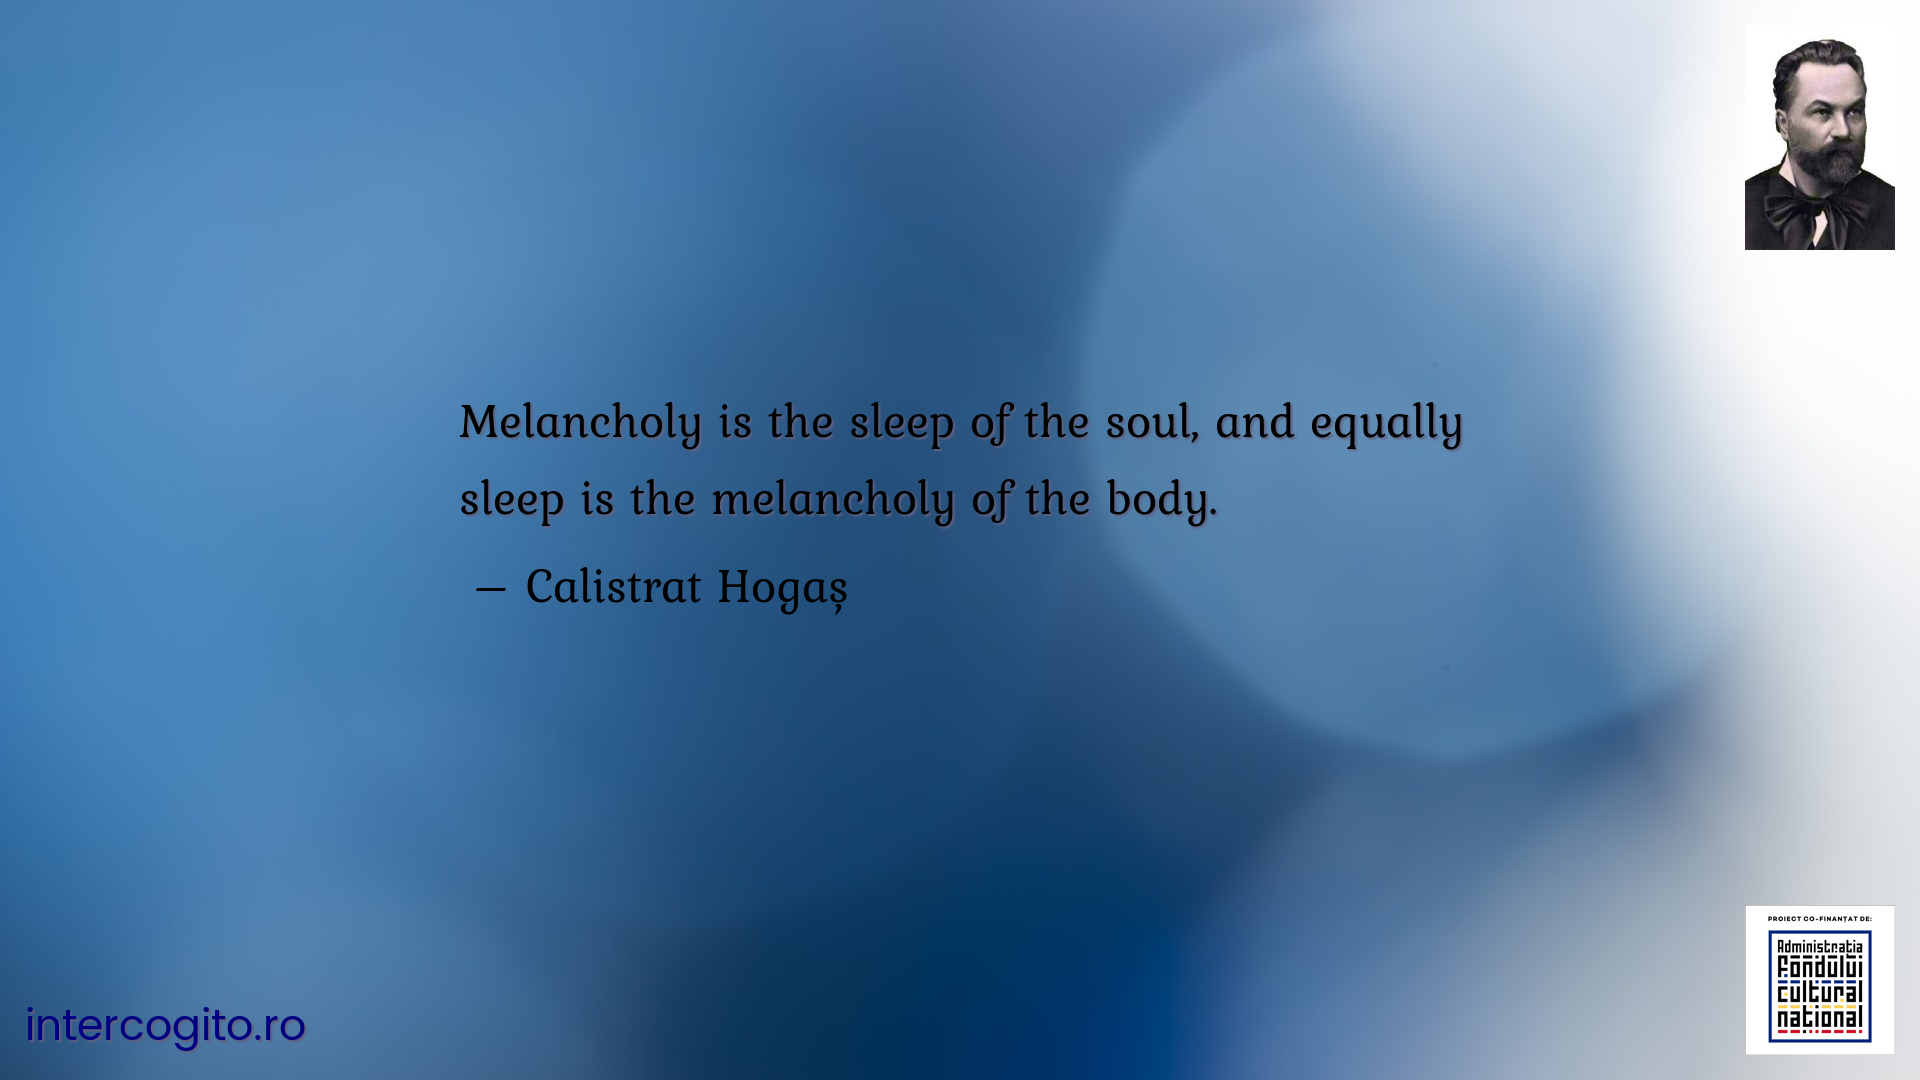 Melancholy is the sleep of the soul, and equally sleep is the melancholy of the body.